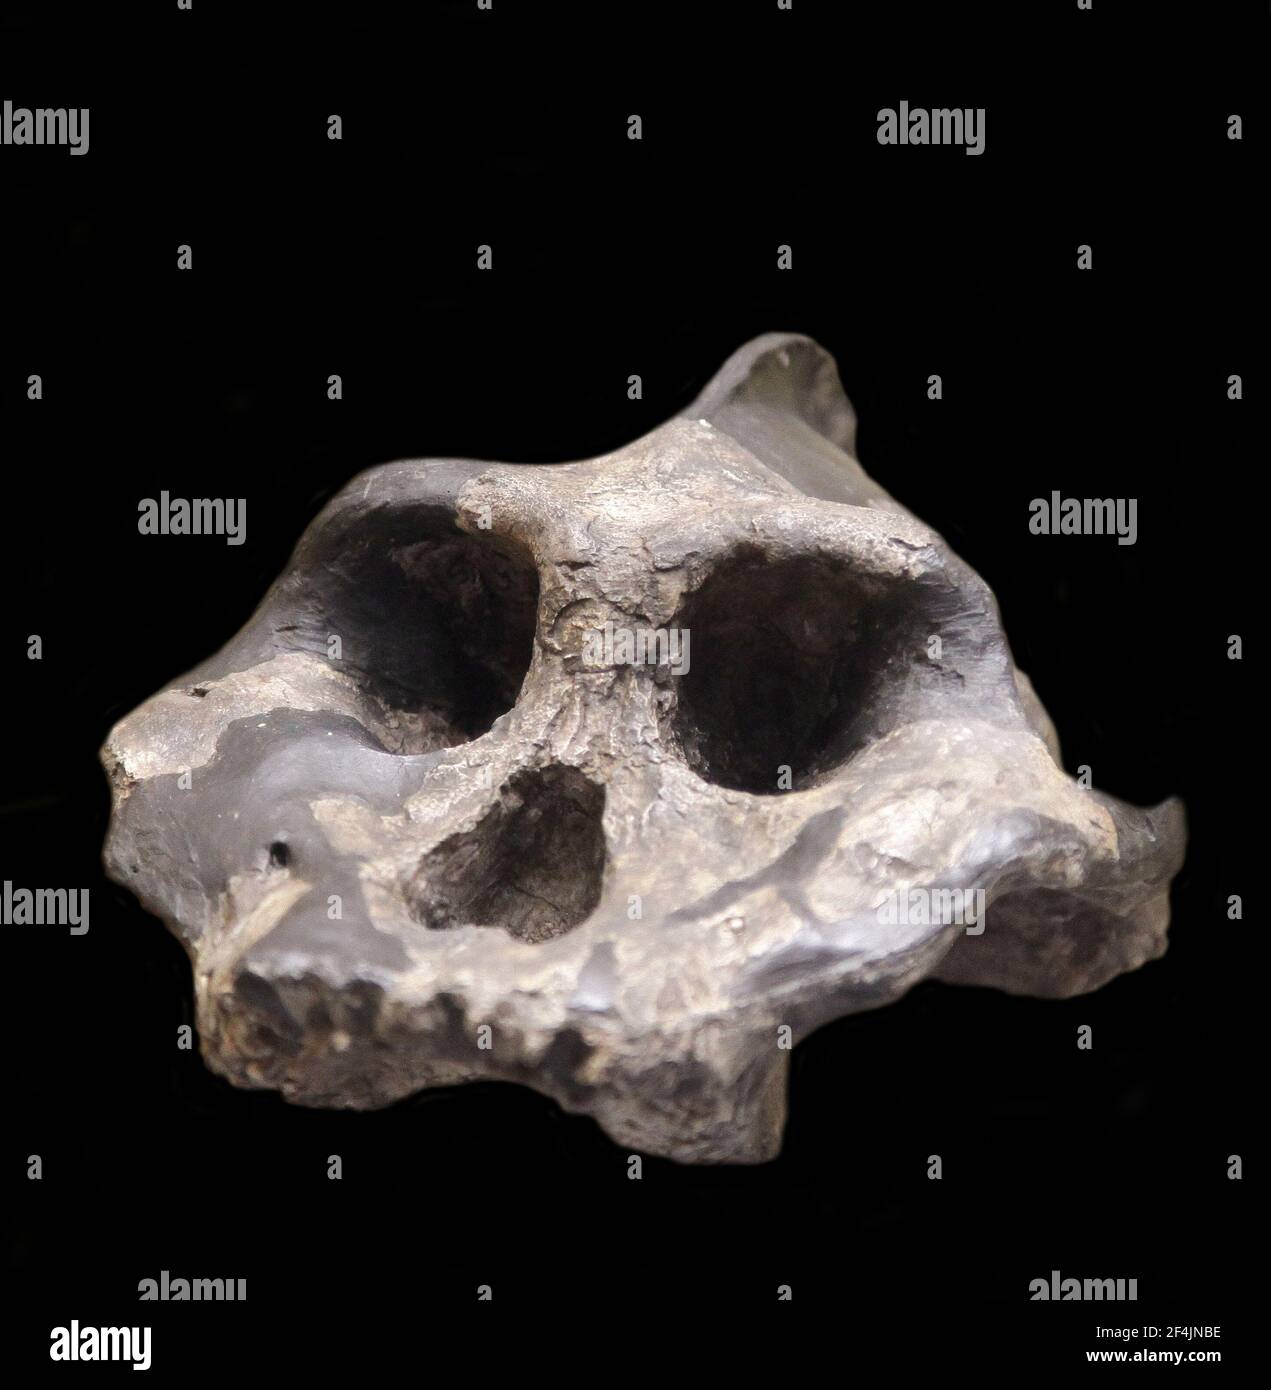 Paranthropus aethiopicus.Extinct species of robust australopithecine from the Late Pliocene to Early Pleistocene of East Africa about 2.7–2.3 million years ago. Stock Photo